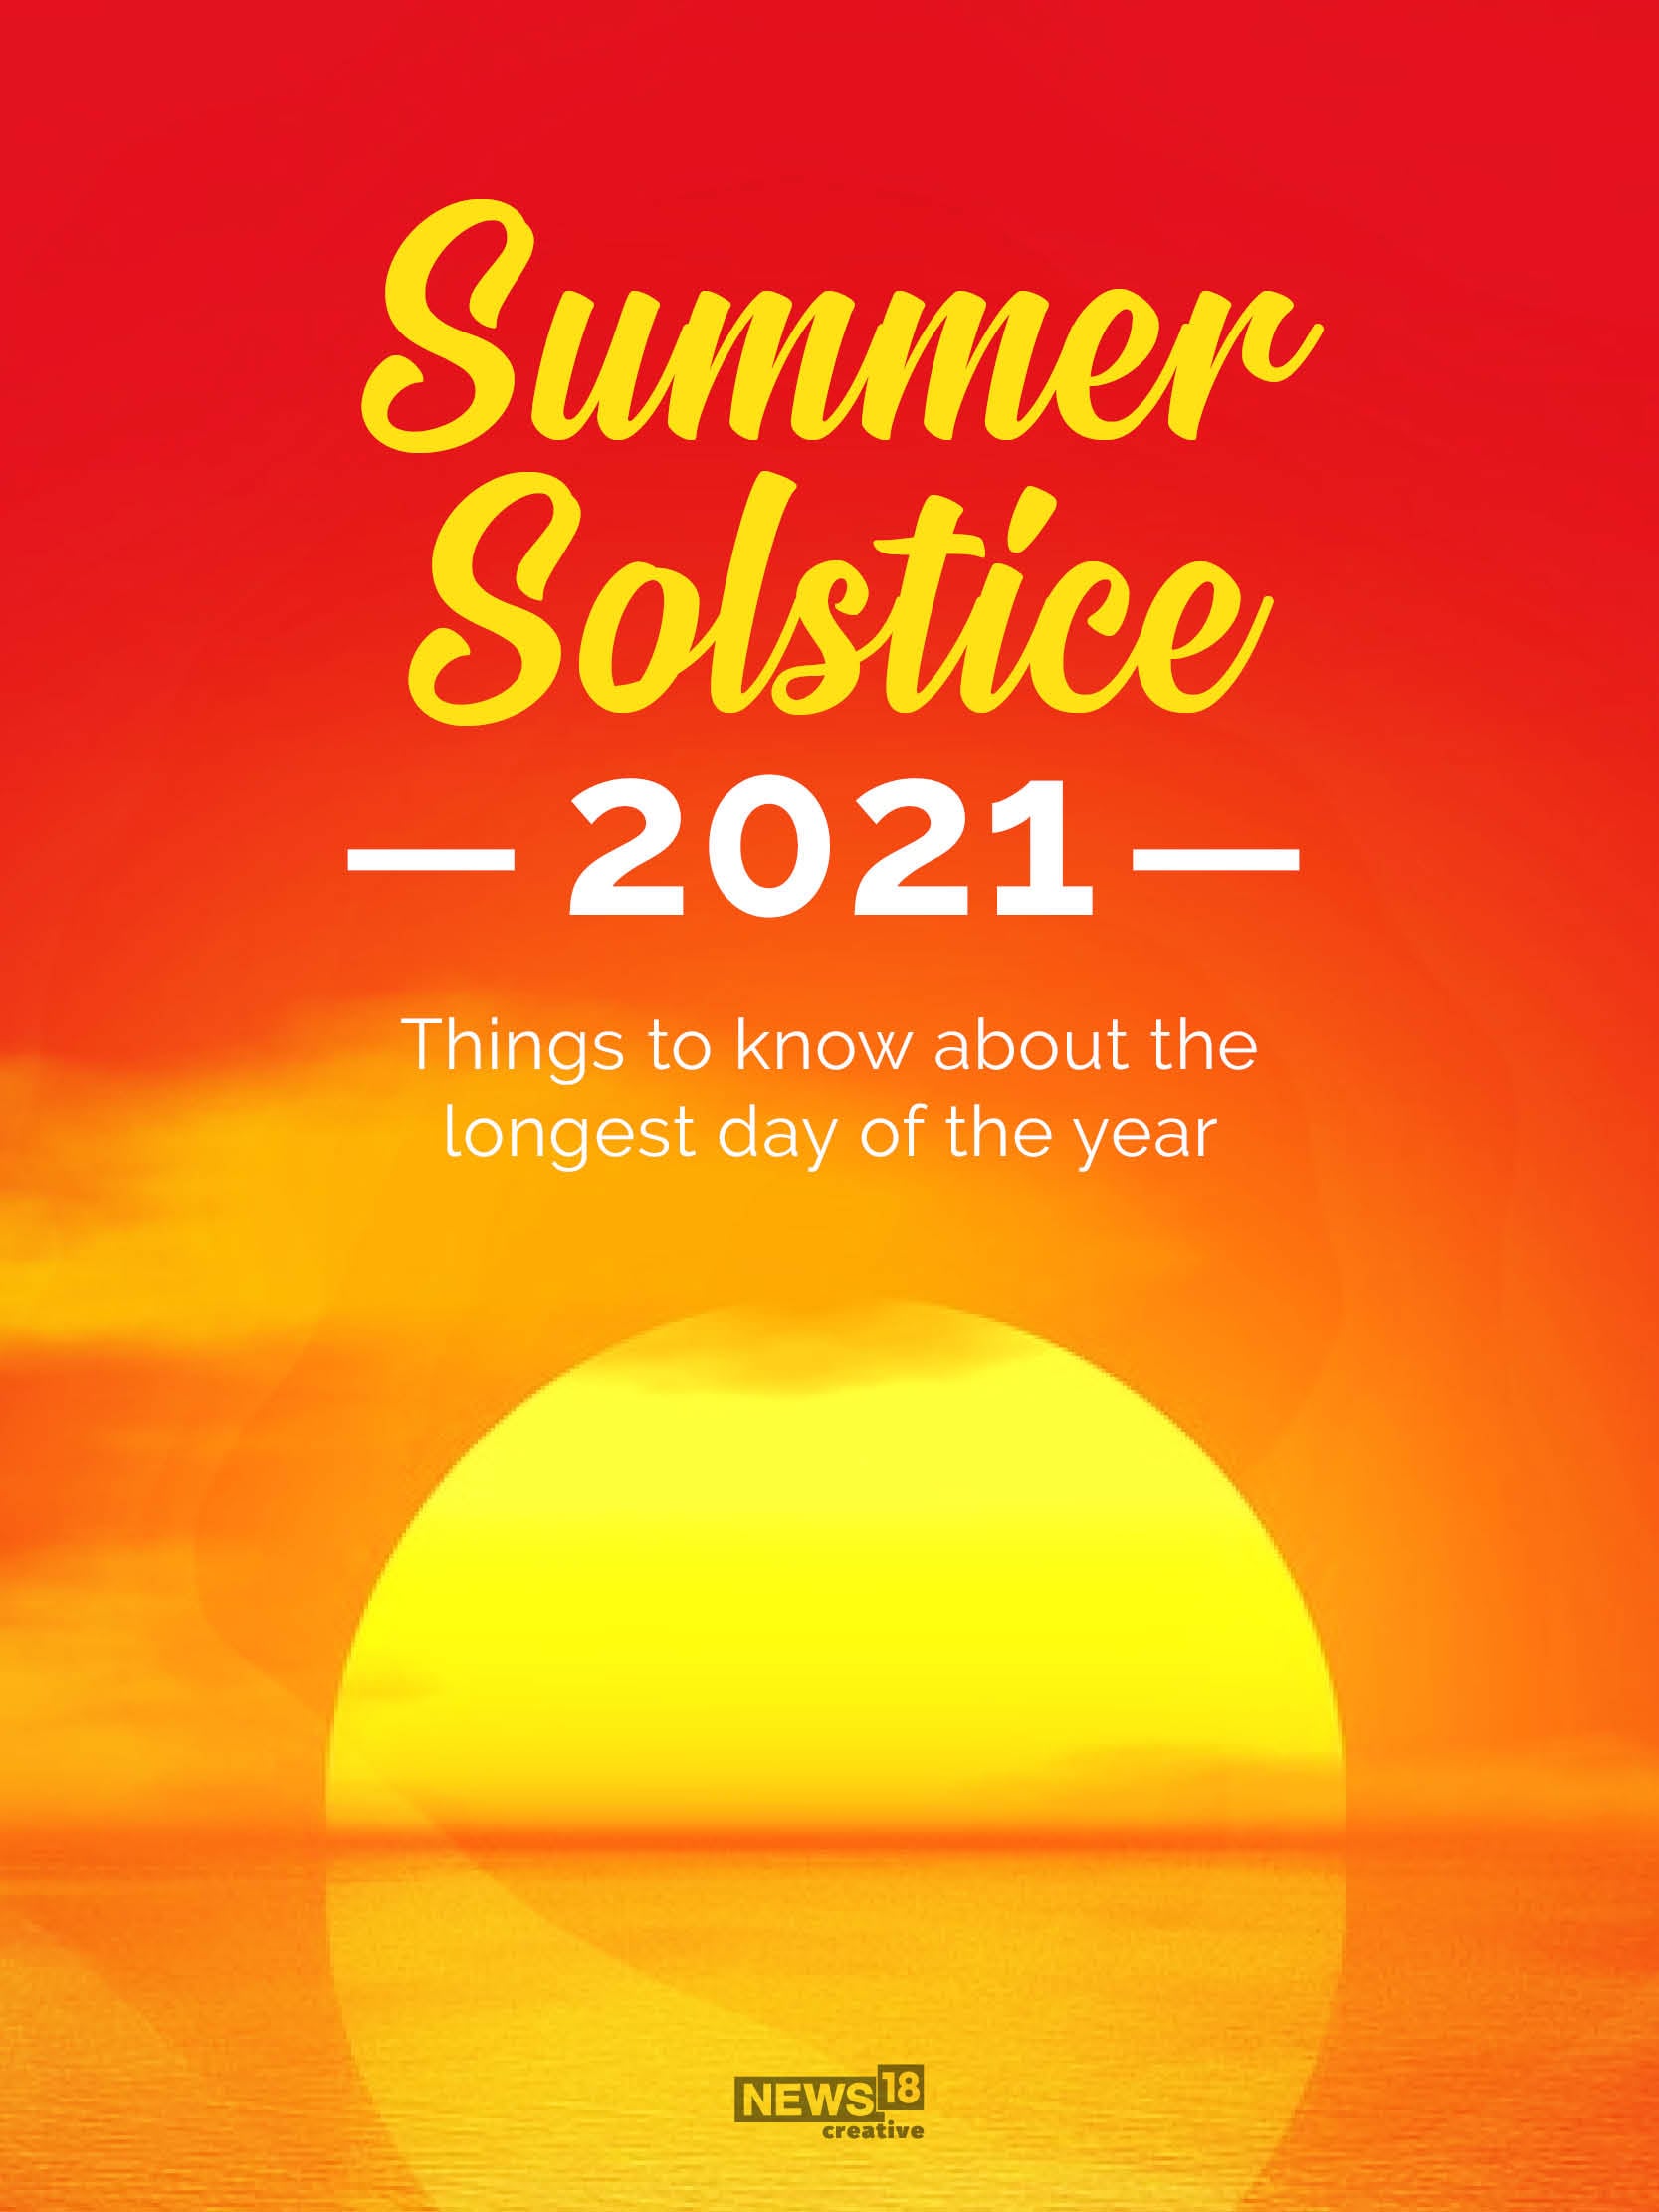 Summer Solstice 2021 Sensual Traditions On The Longest Day Of The Hiasan Rumah